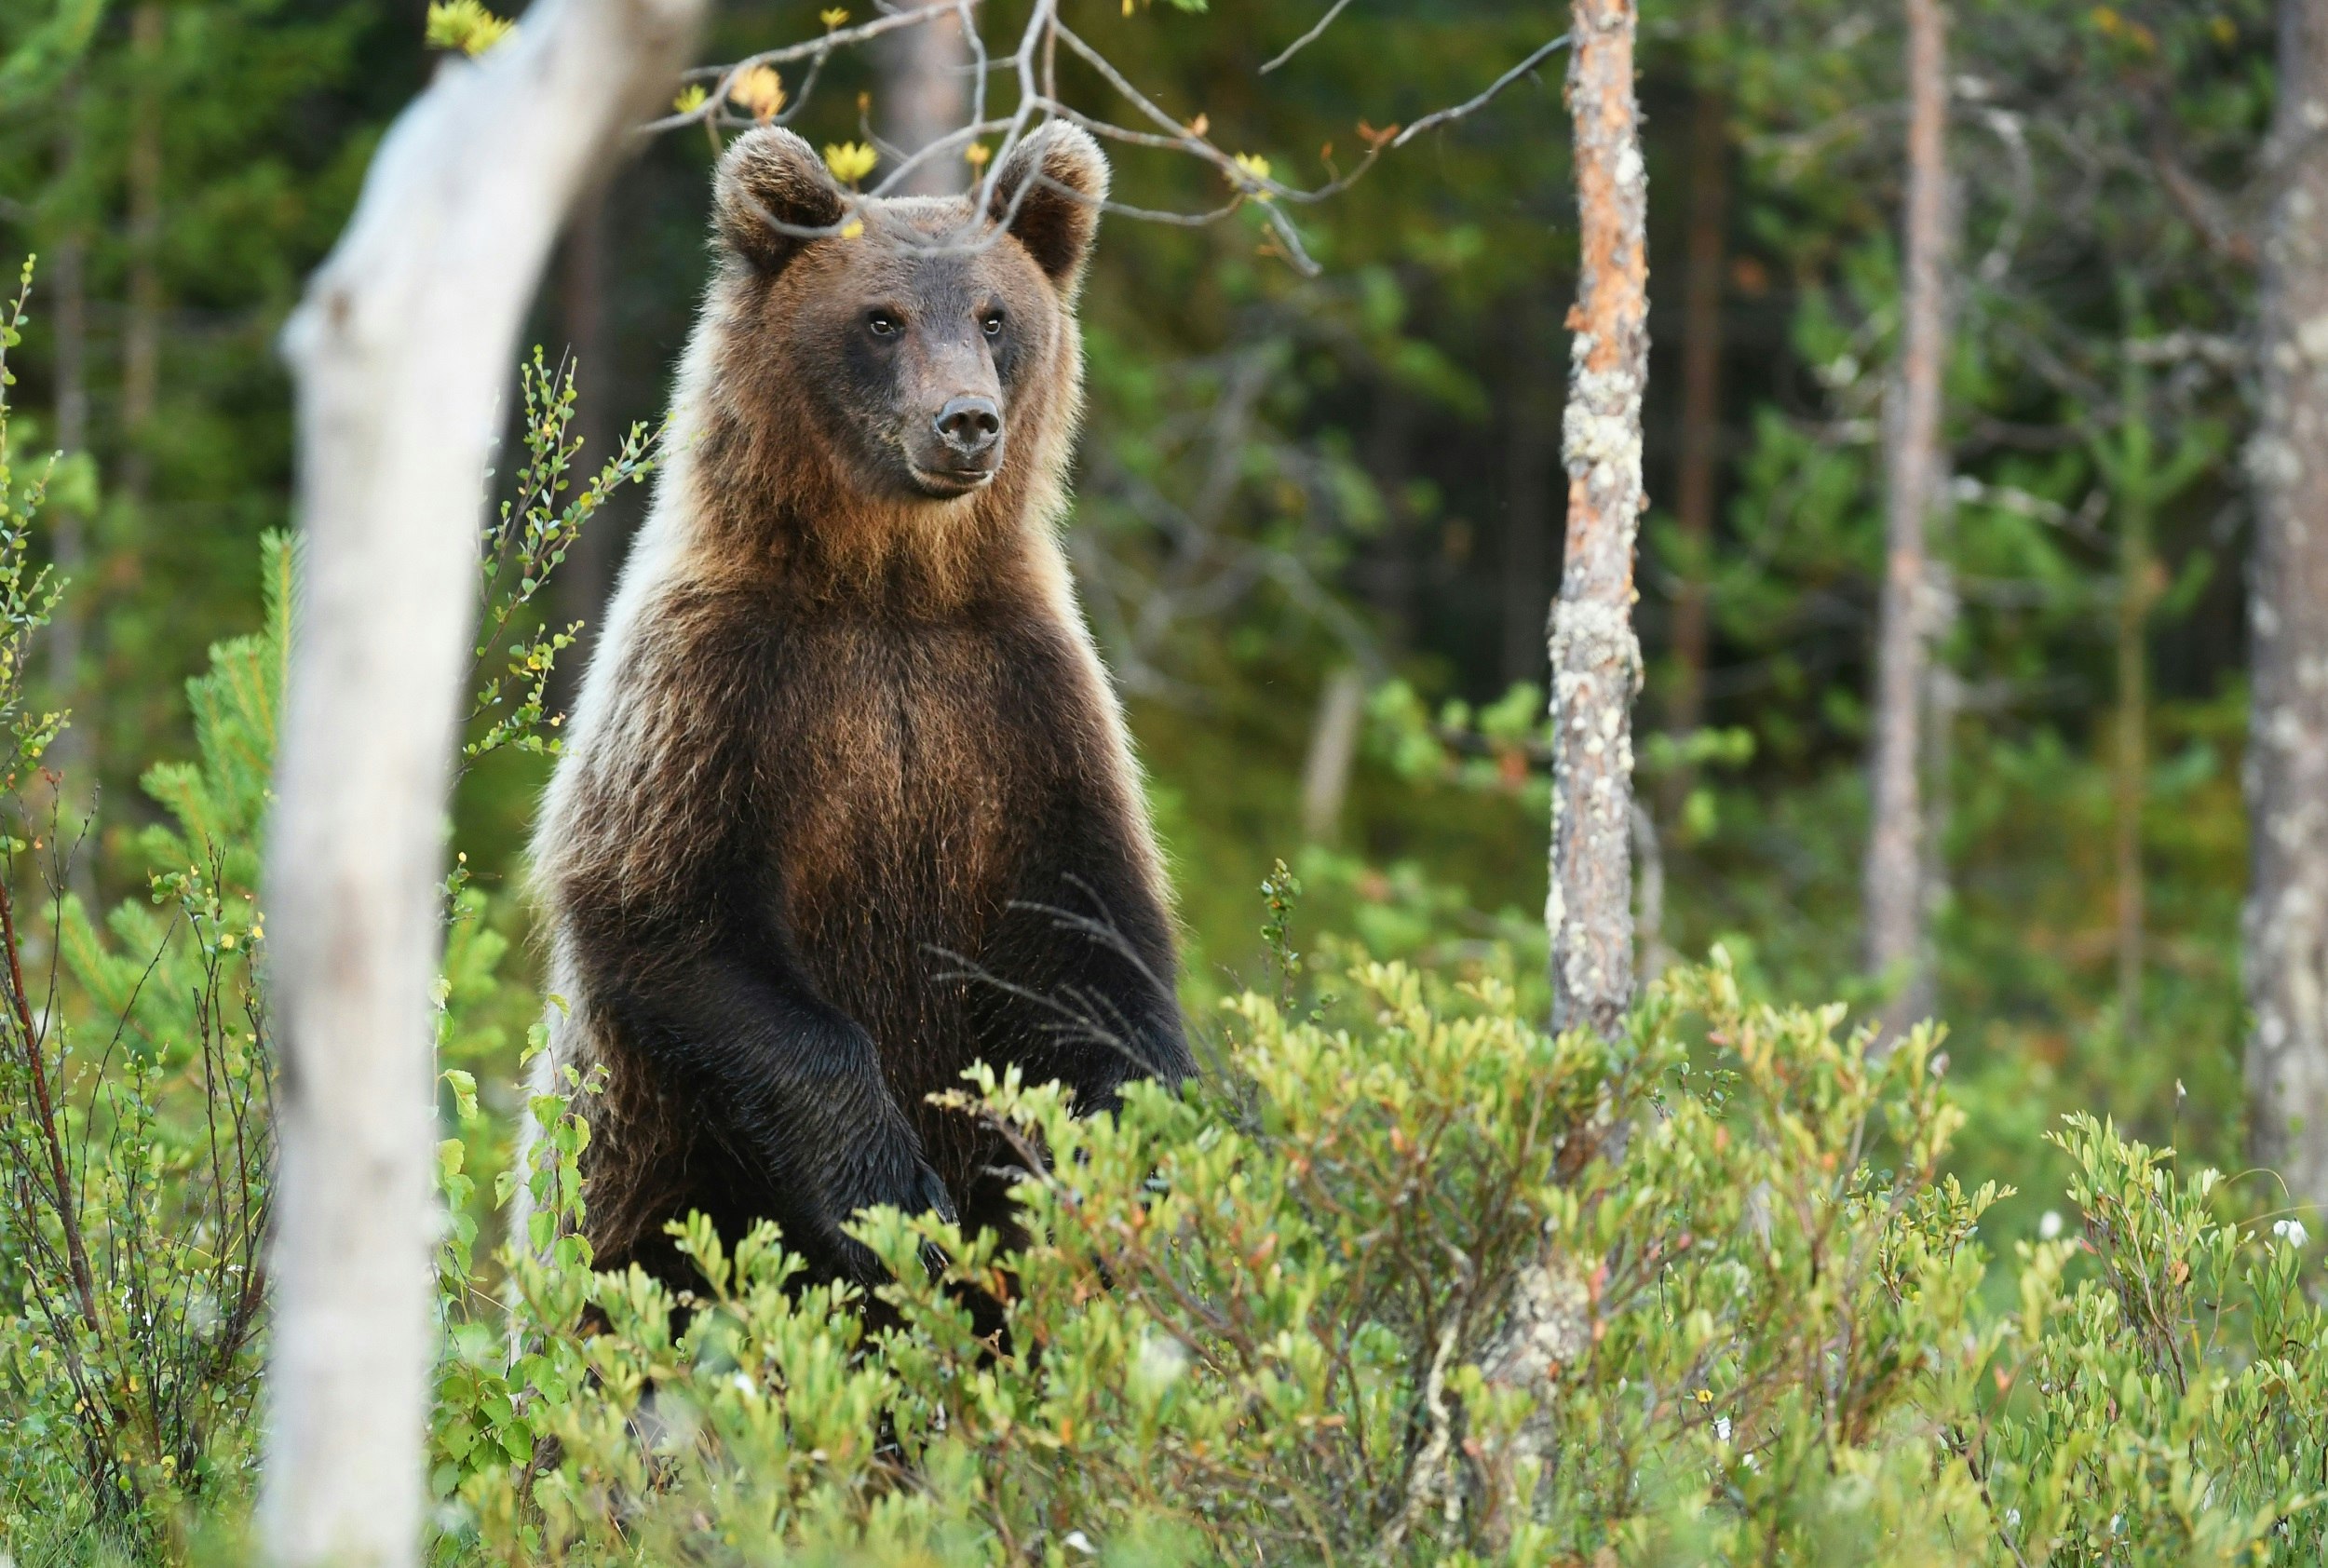 A grizzly bear stands on its hind legs, with its upper body visible above bushes in the forest.